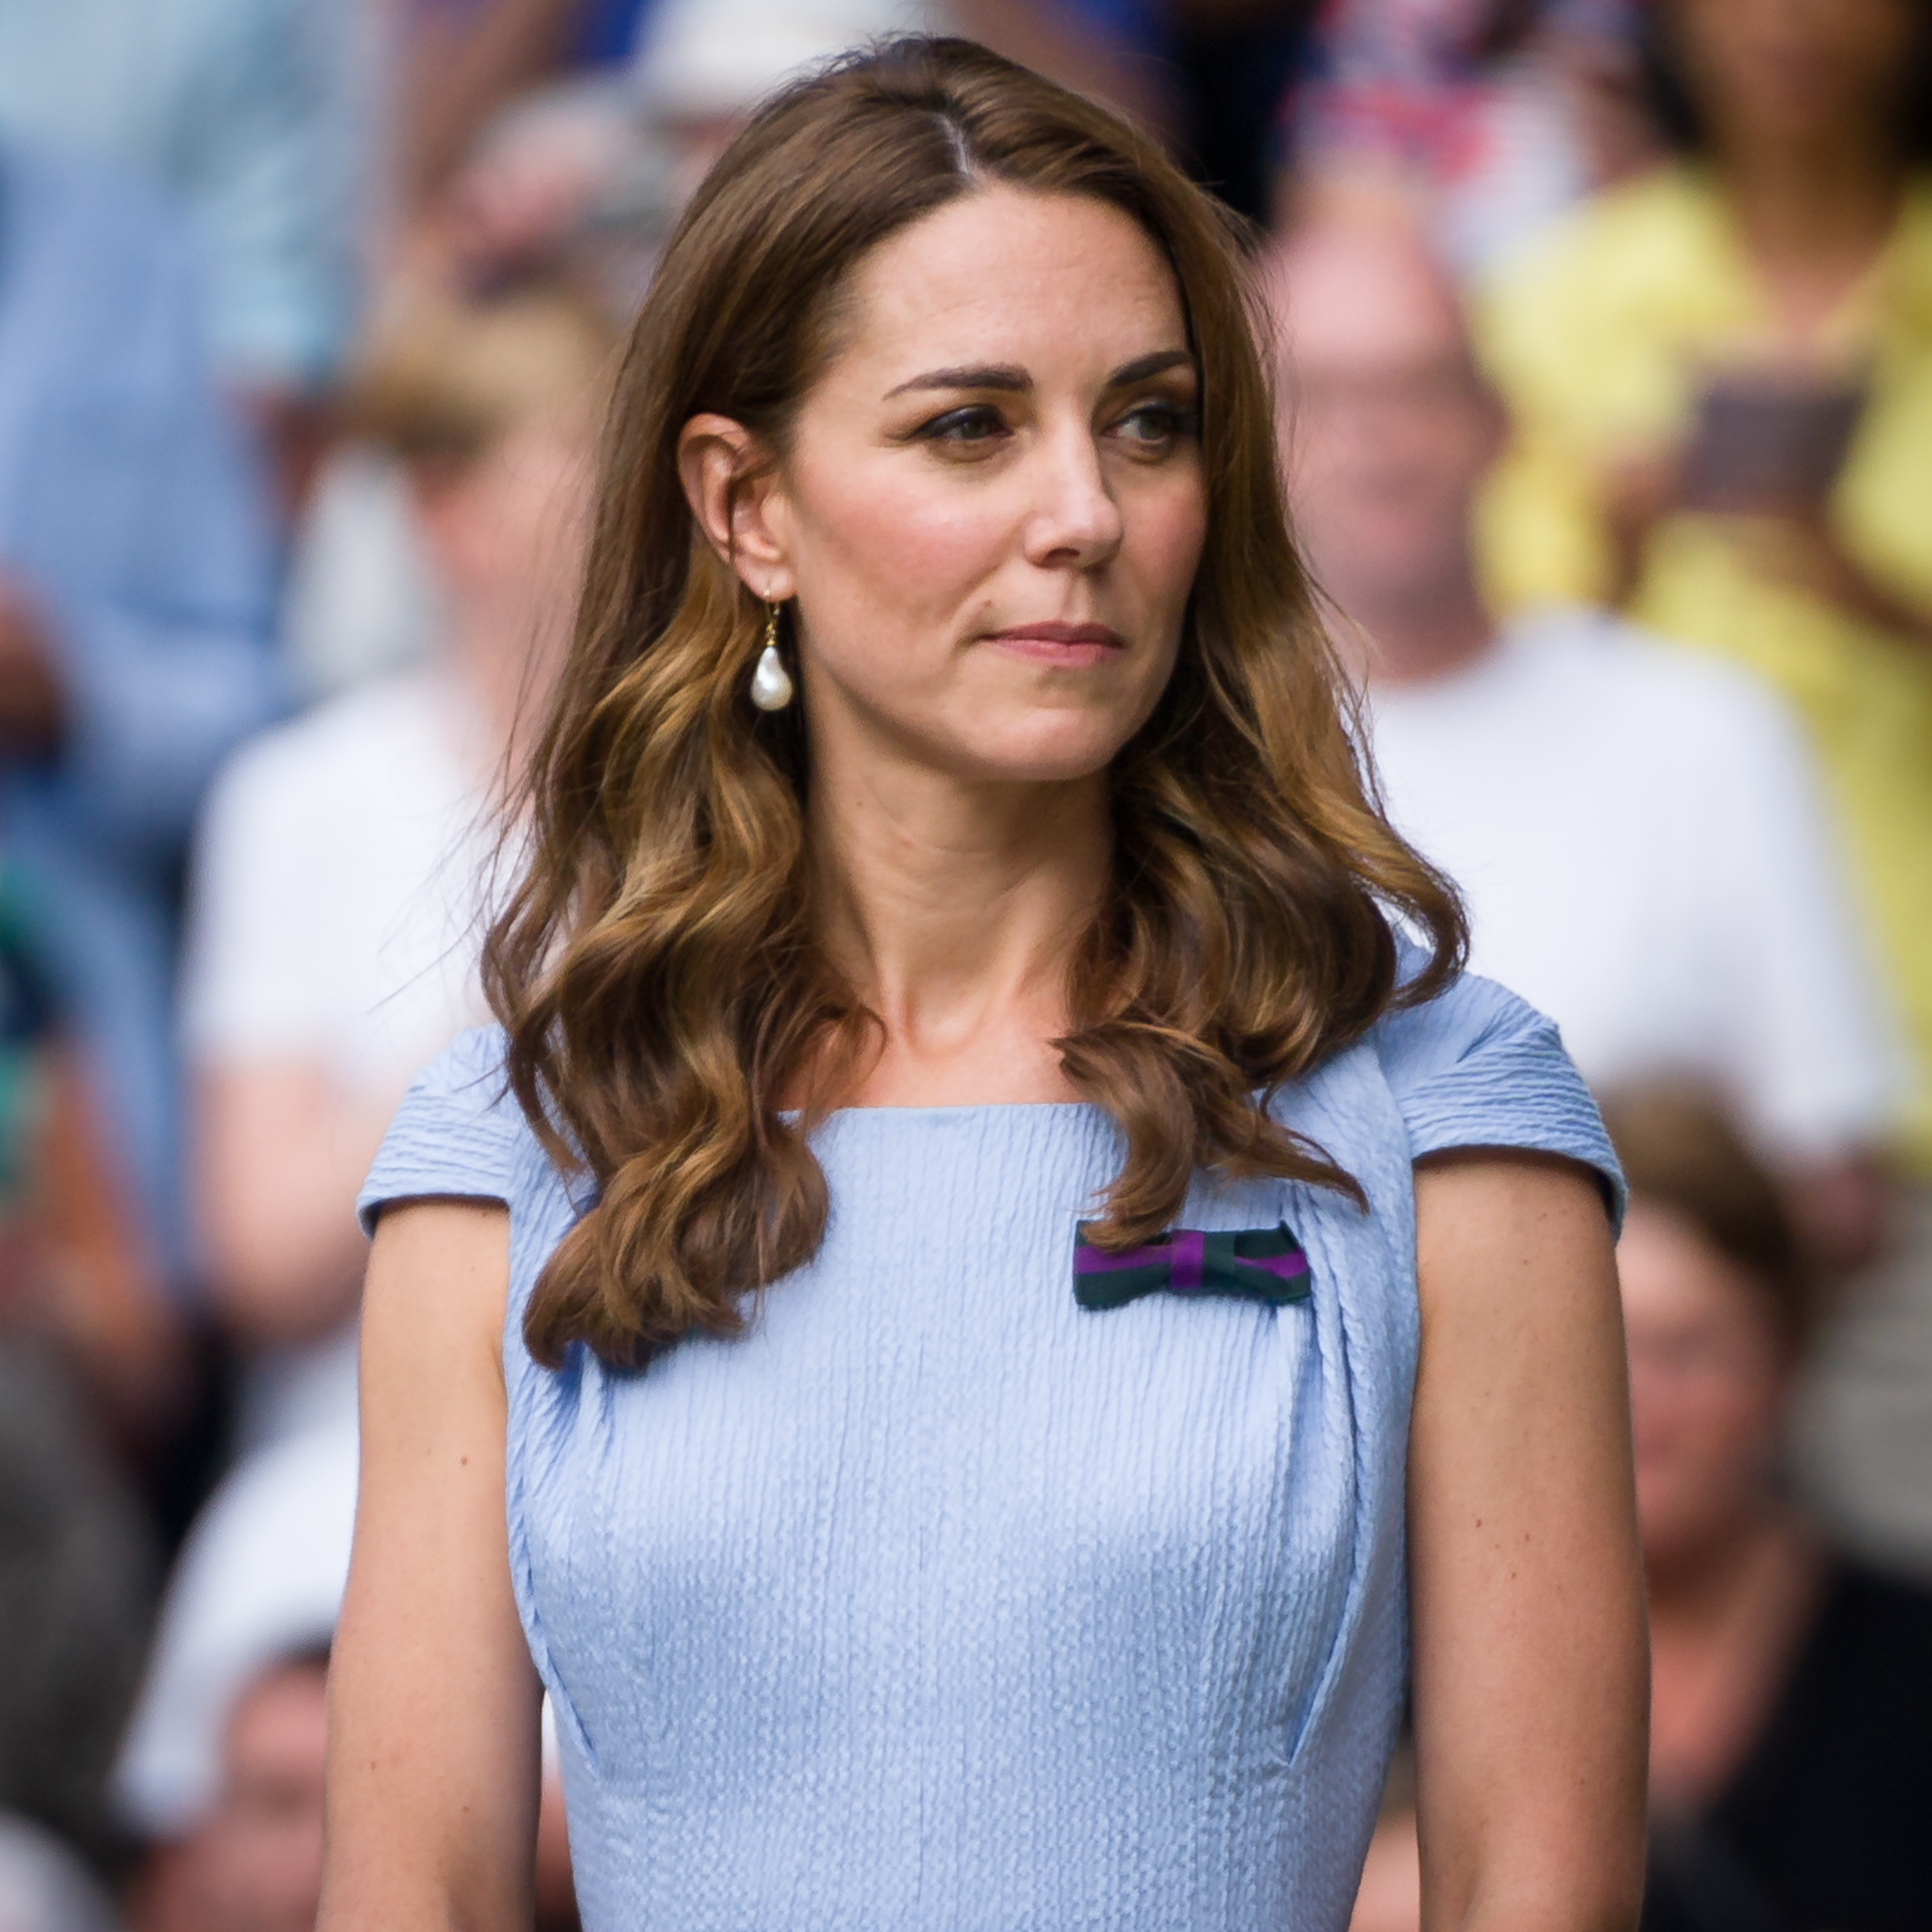 Catherine, Princess of Wales during The Championships - Wimbledon 2019 on July 14, 2019 in London, England | Source: Getty Images